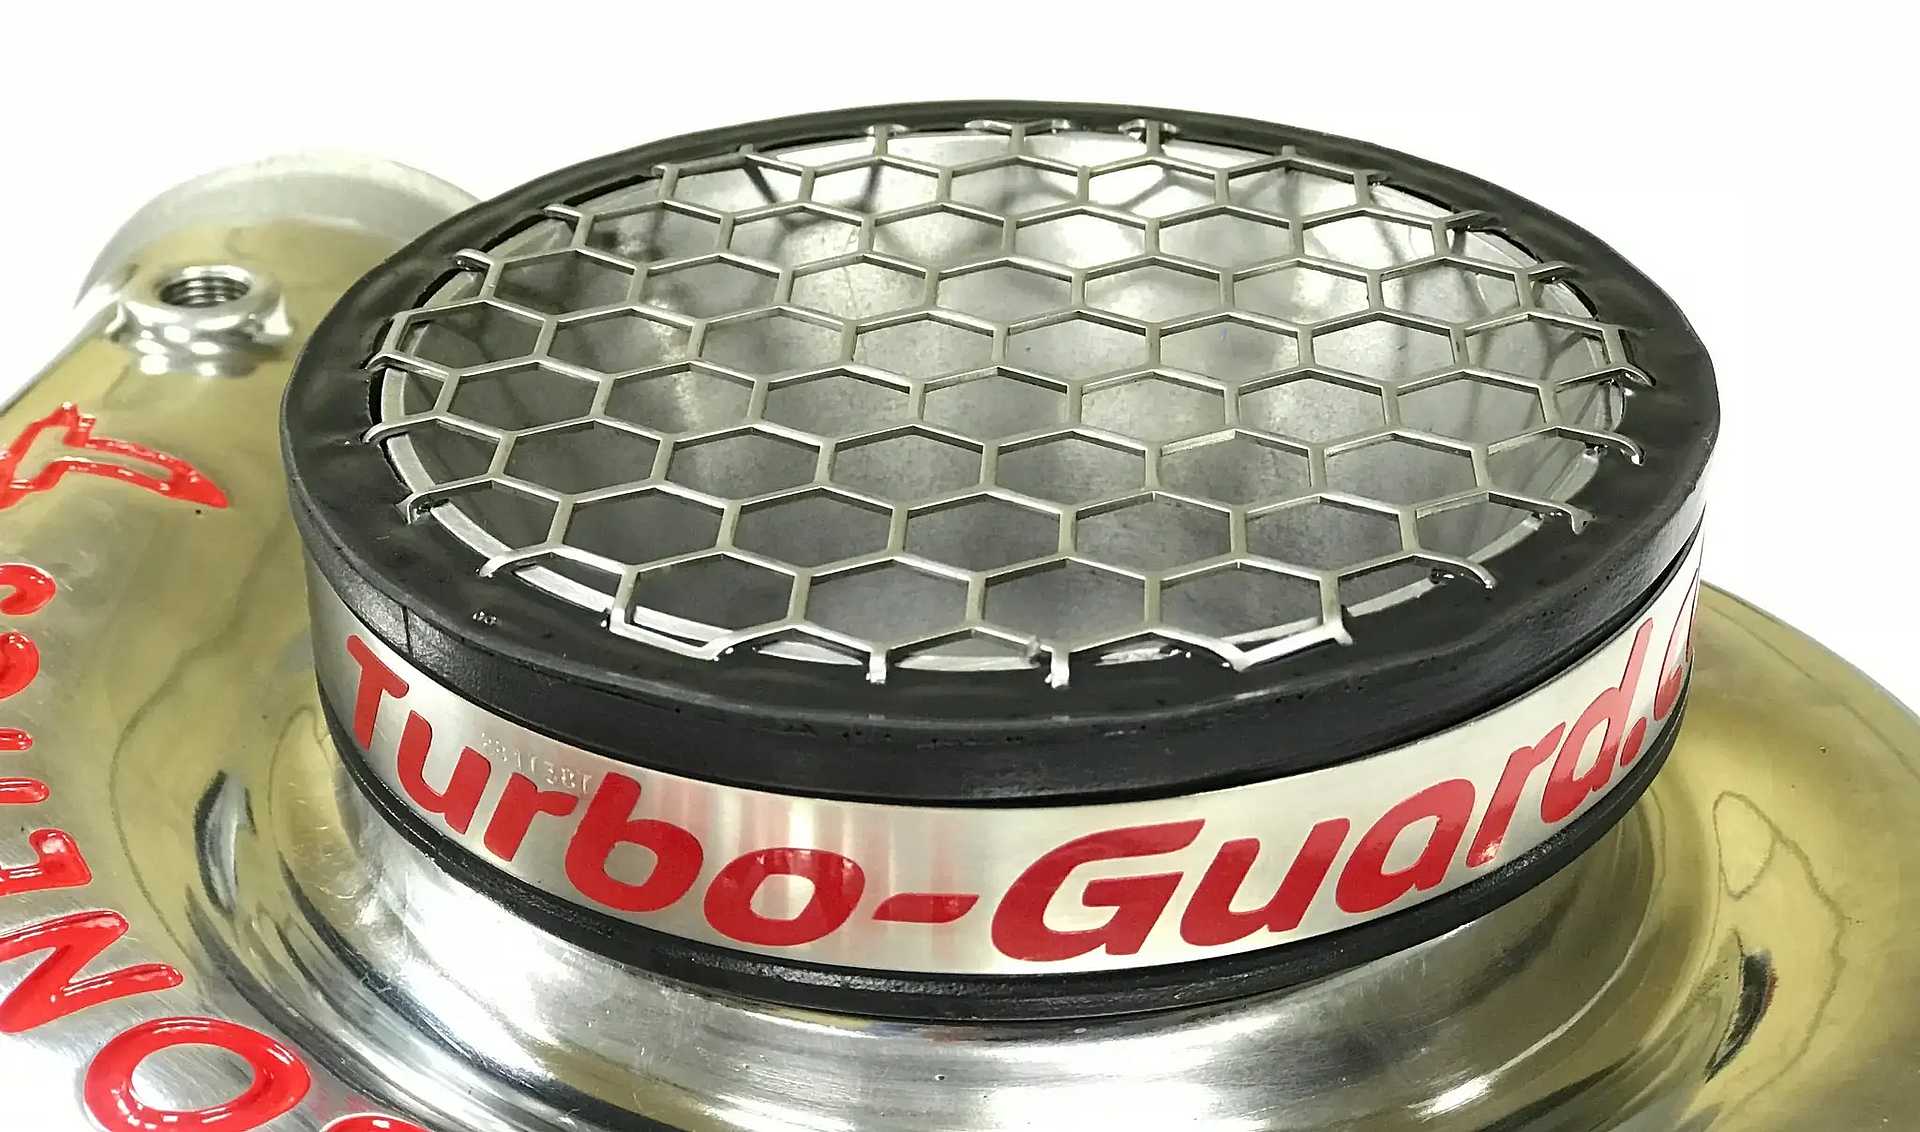 Turbo-Guard Maxx filter turbocharger protection grid